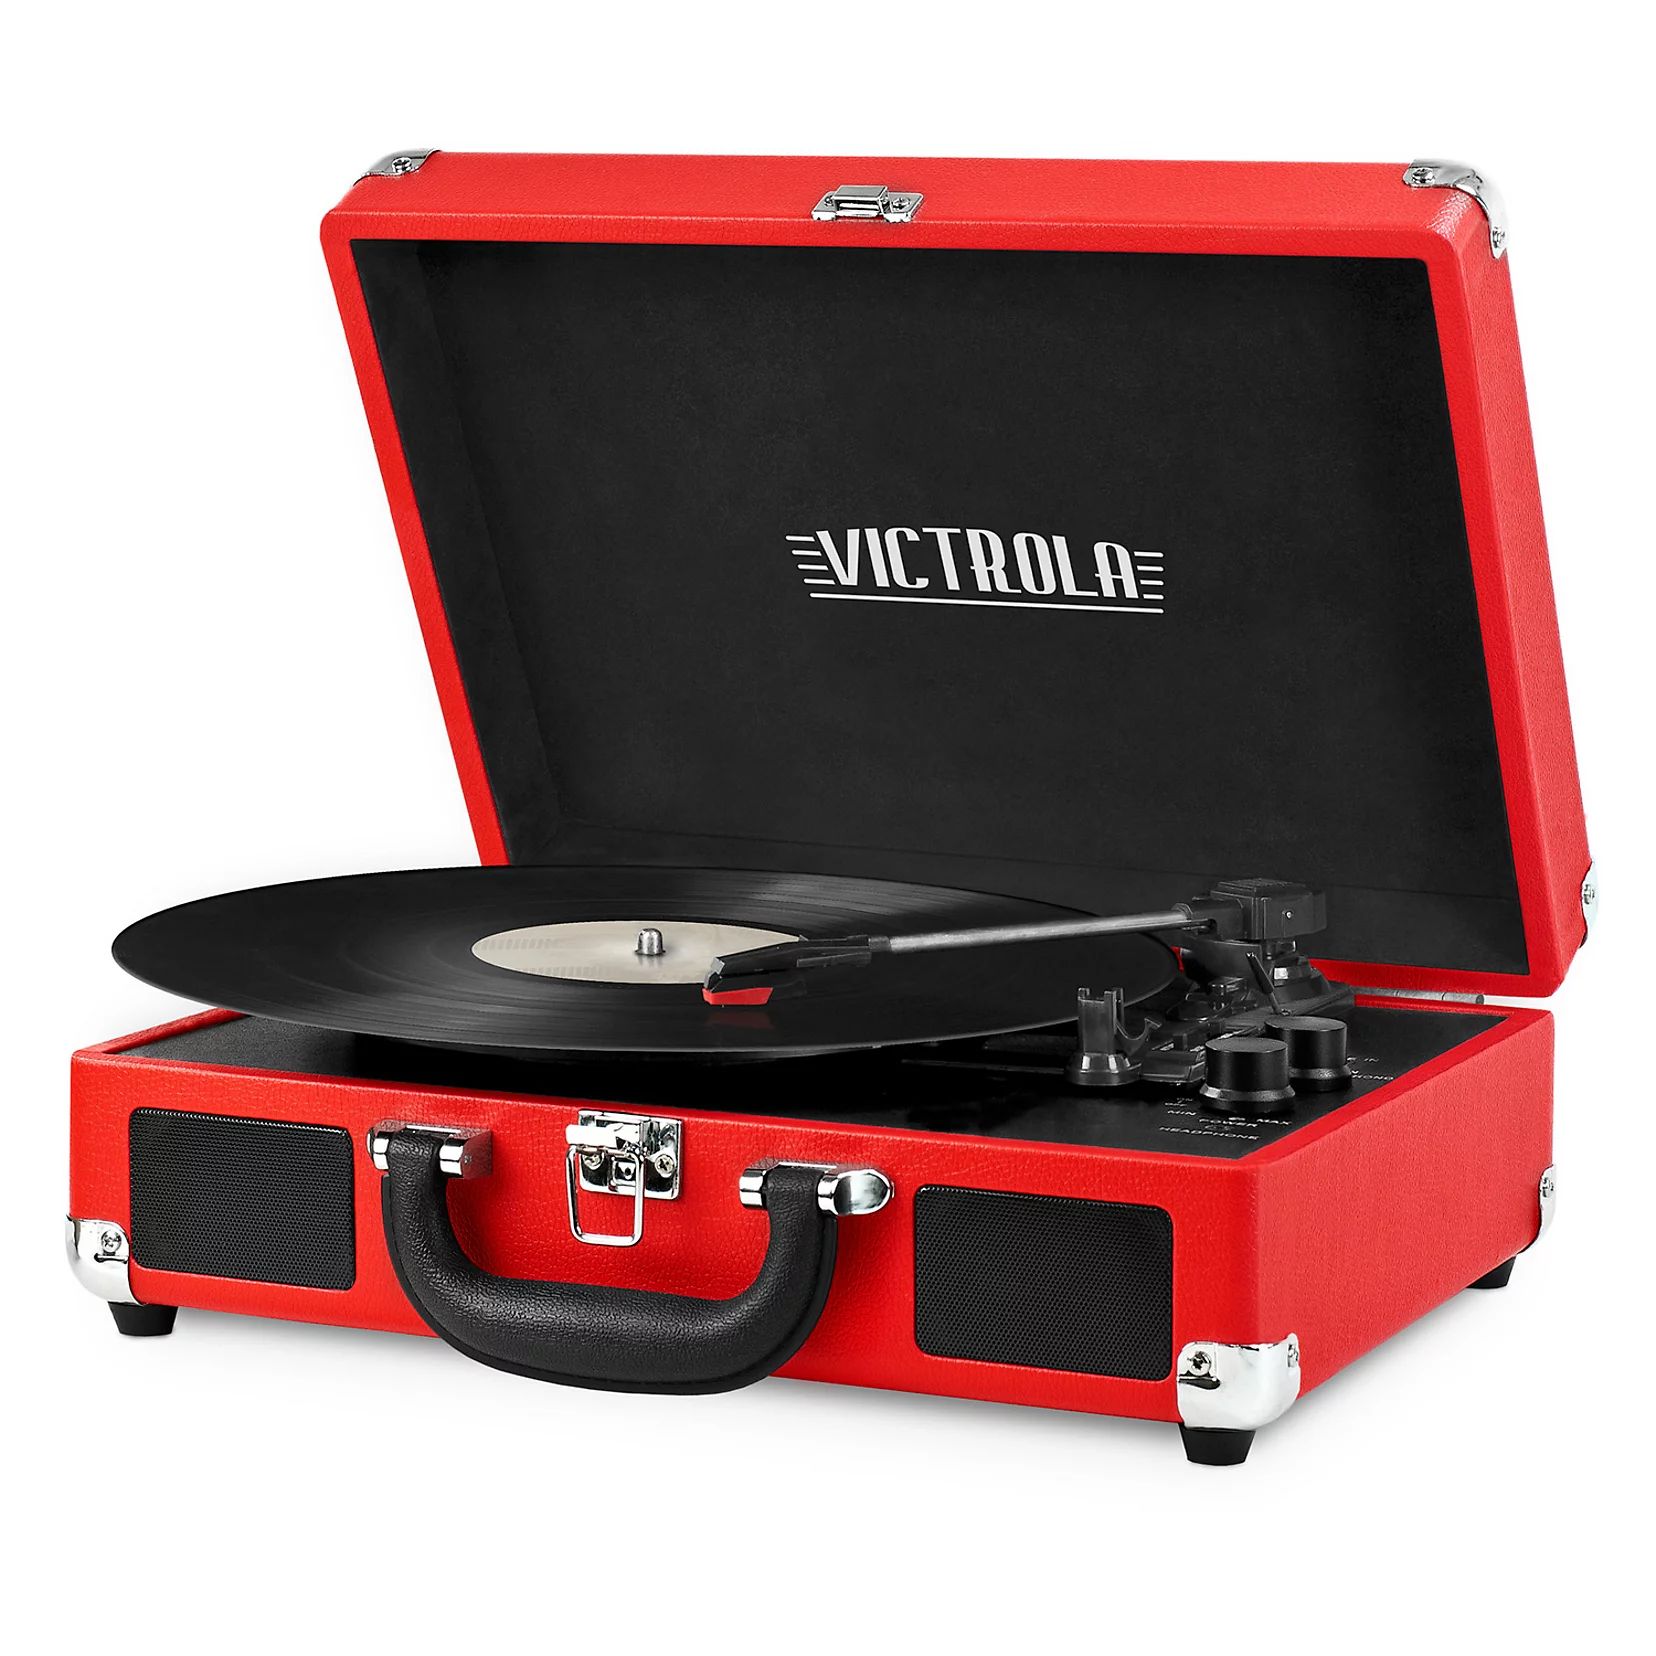 Victrola Portable Suitcase Record Player with Bluetooth | Kohl's